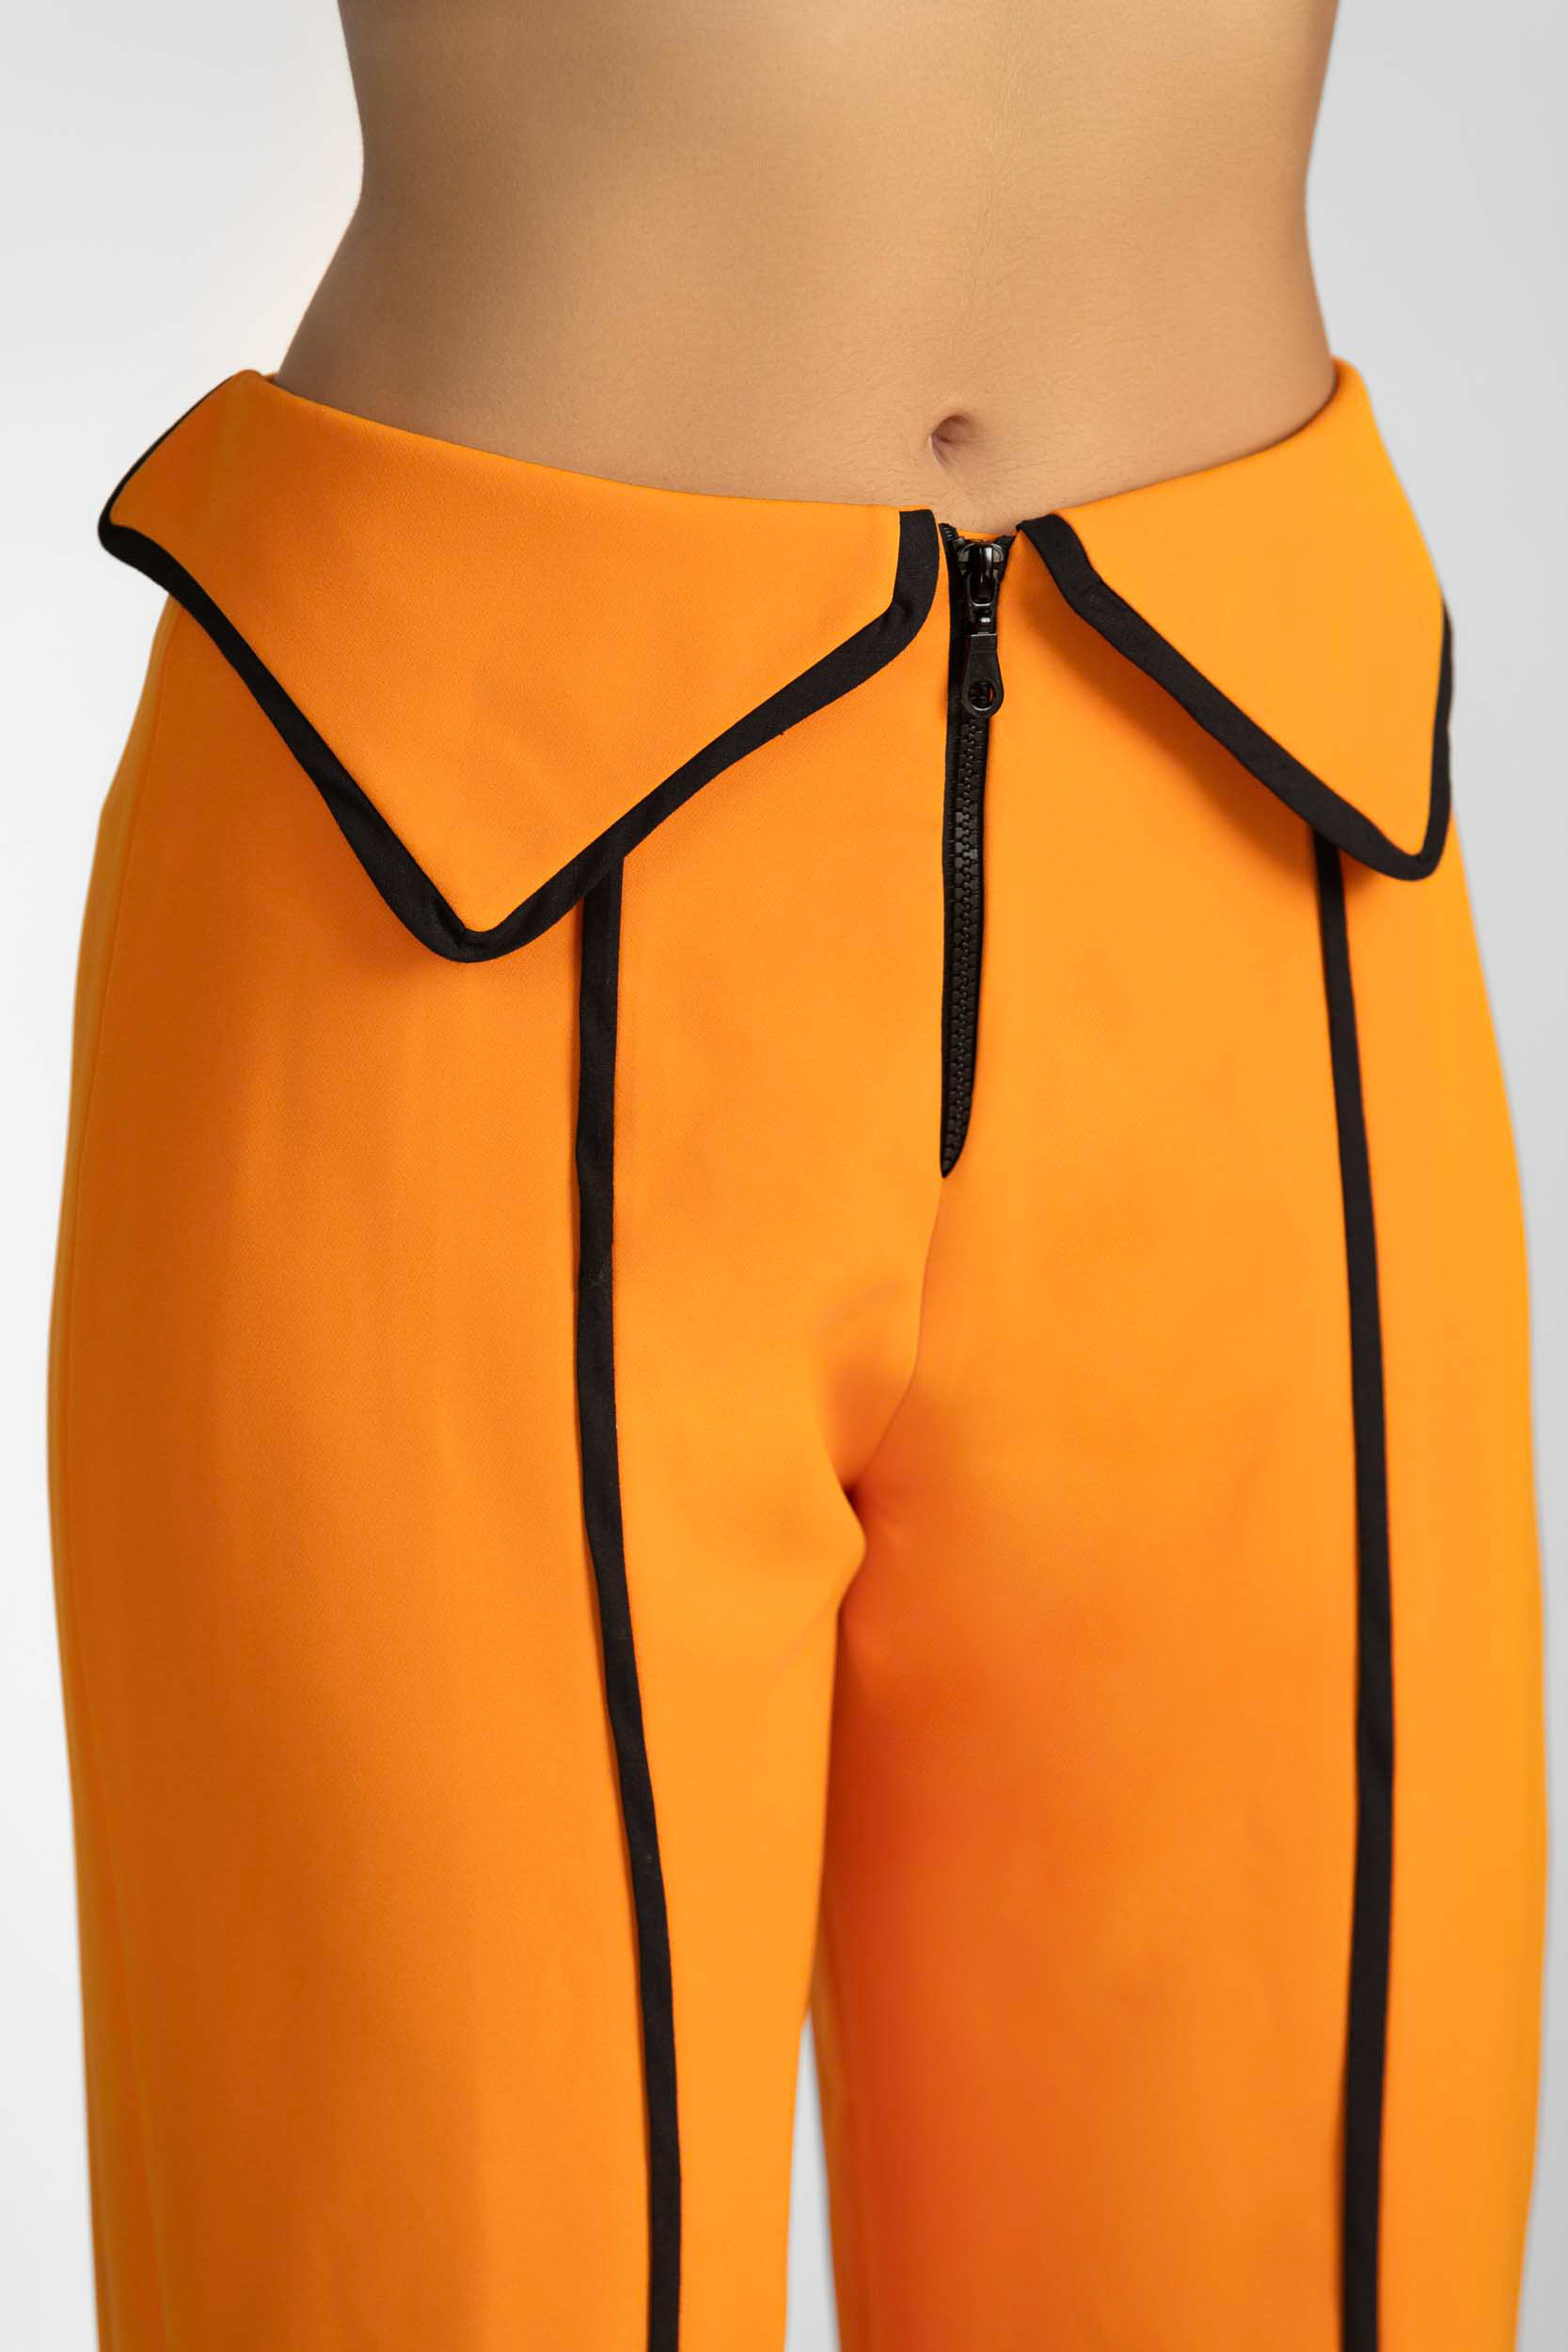 Orange Straight leg pants, with dtripe details, collar on the waist and zipper, details.